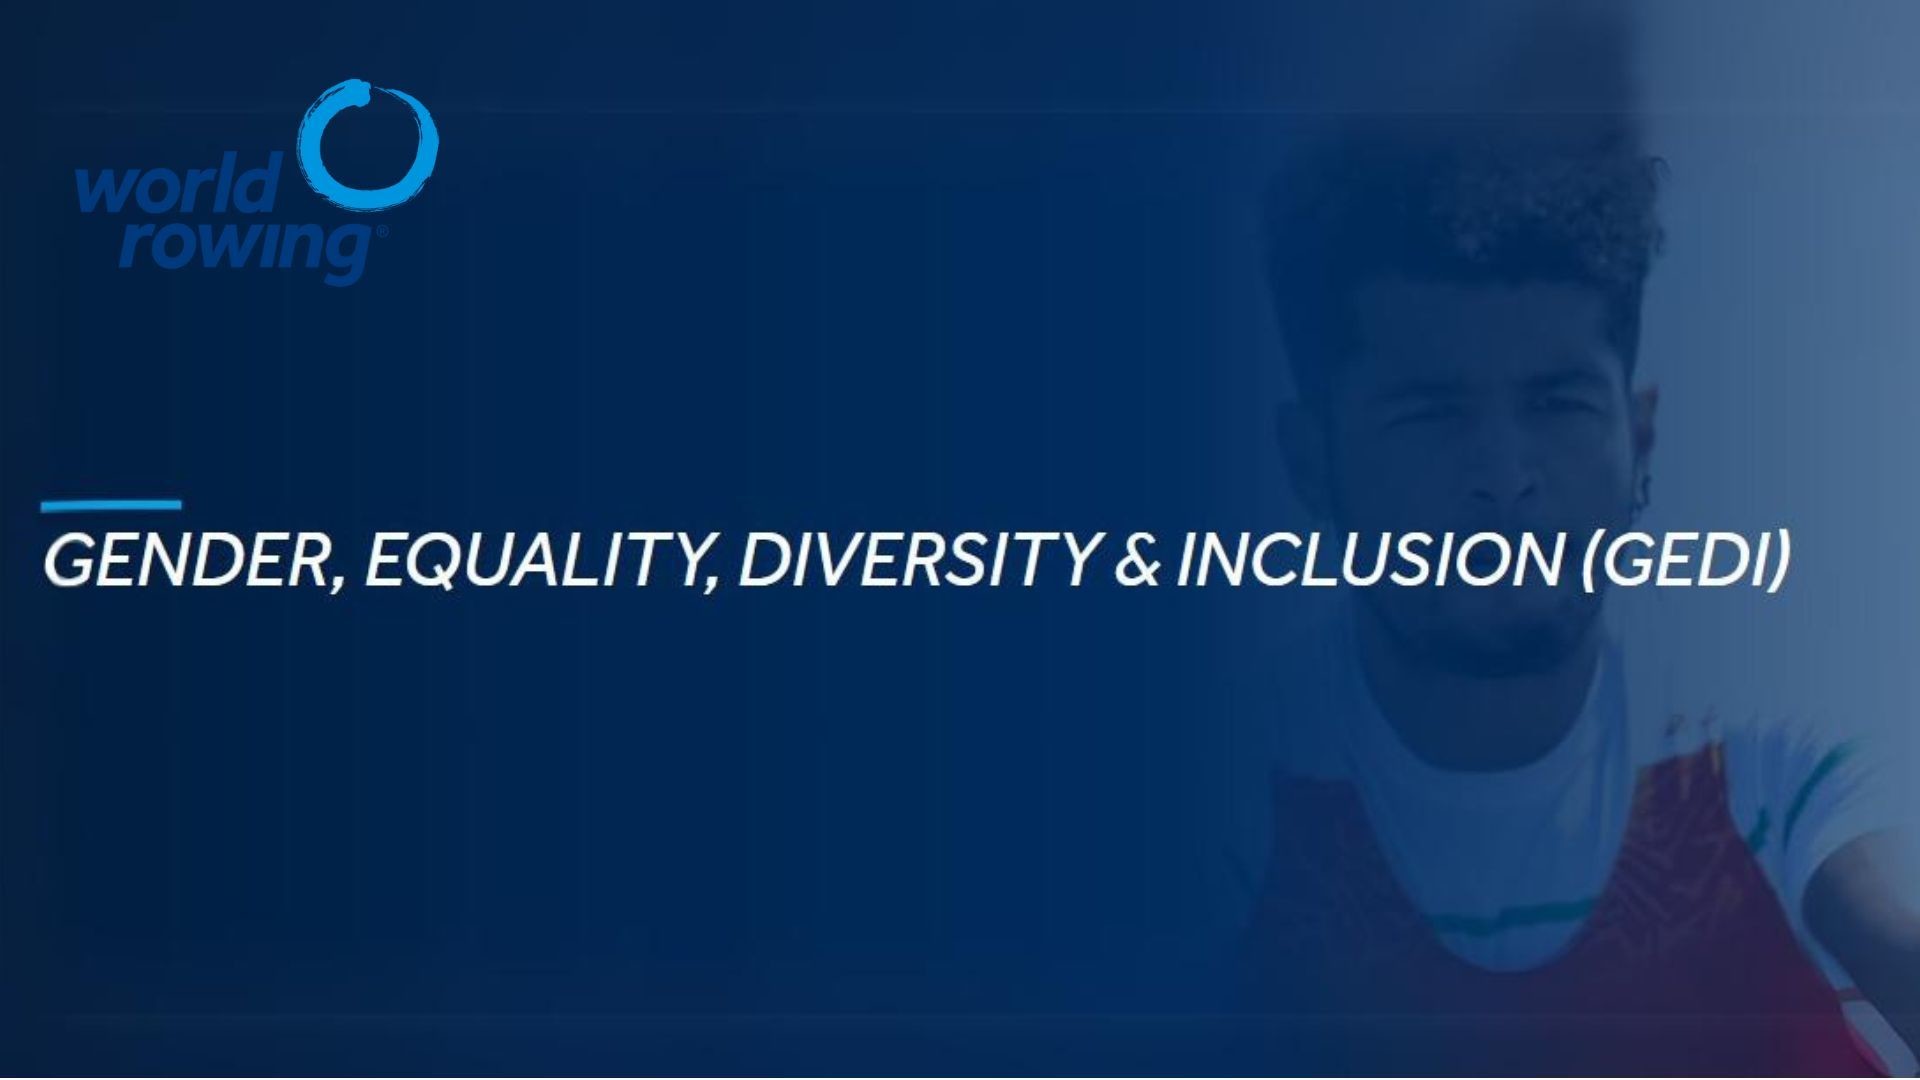 World Rowing Strategic Plan for Gender, Equality, Diversity and Inclusion